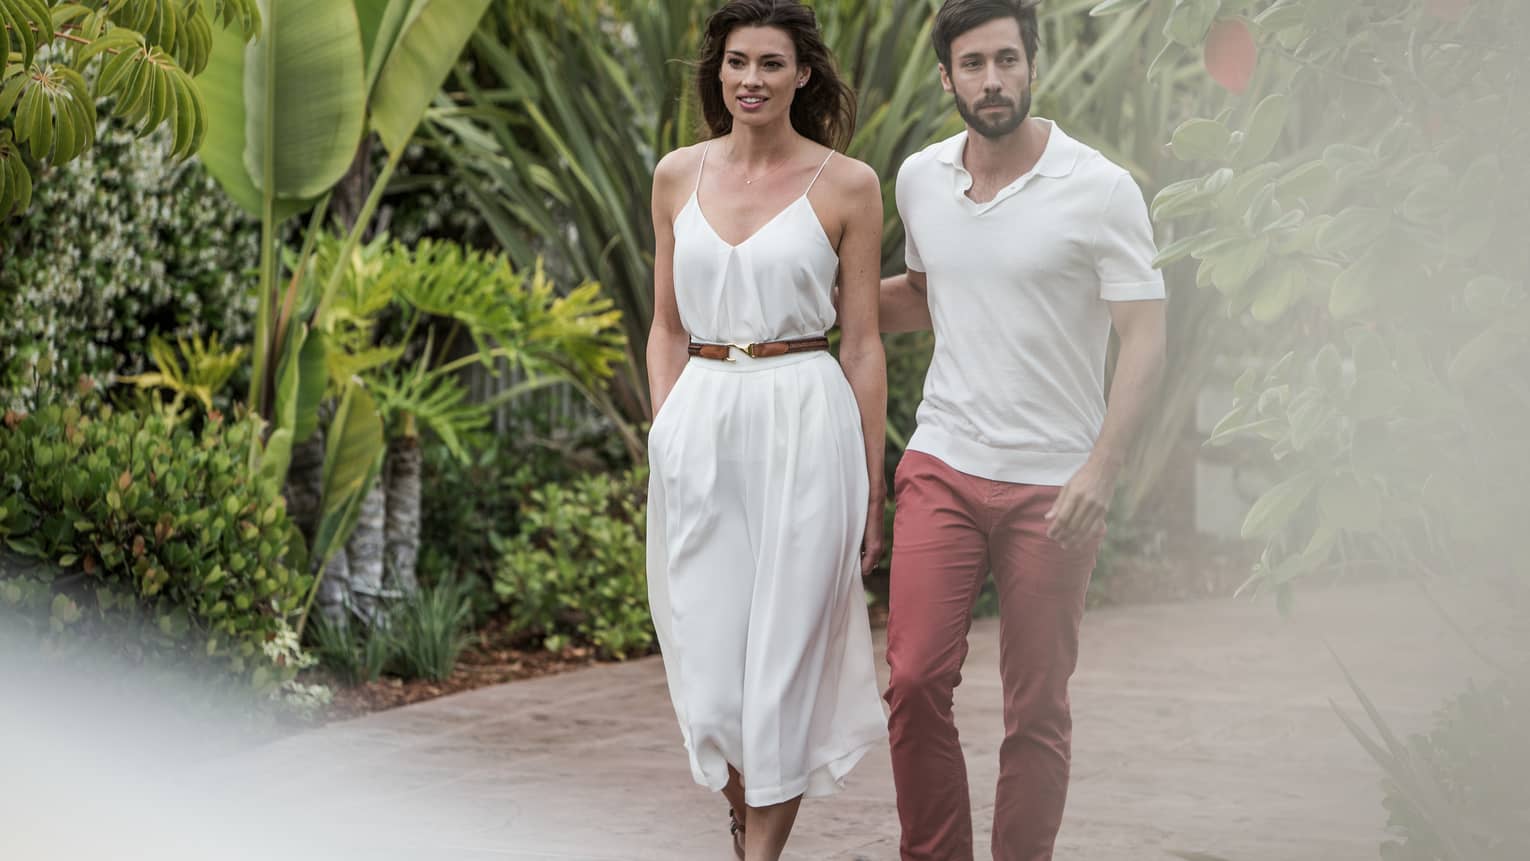 Man and woman in casual summer clothes stroll down path surrounded by tropical plants